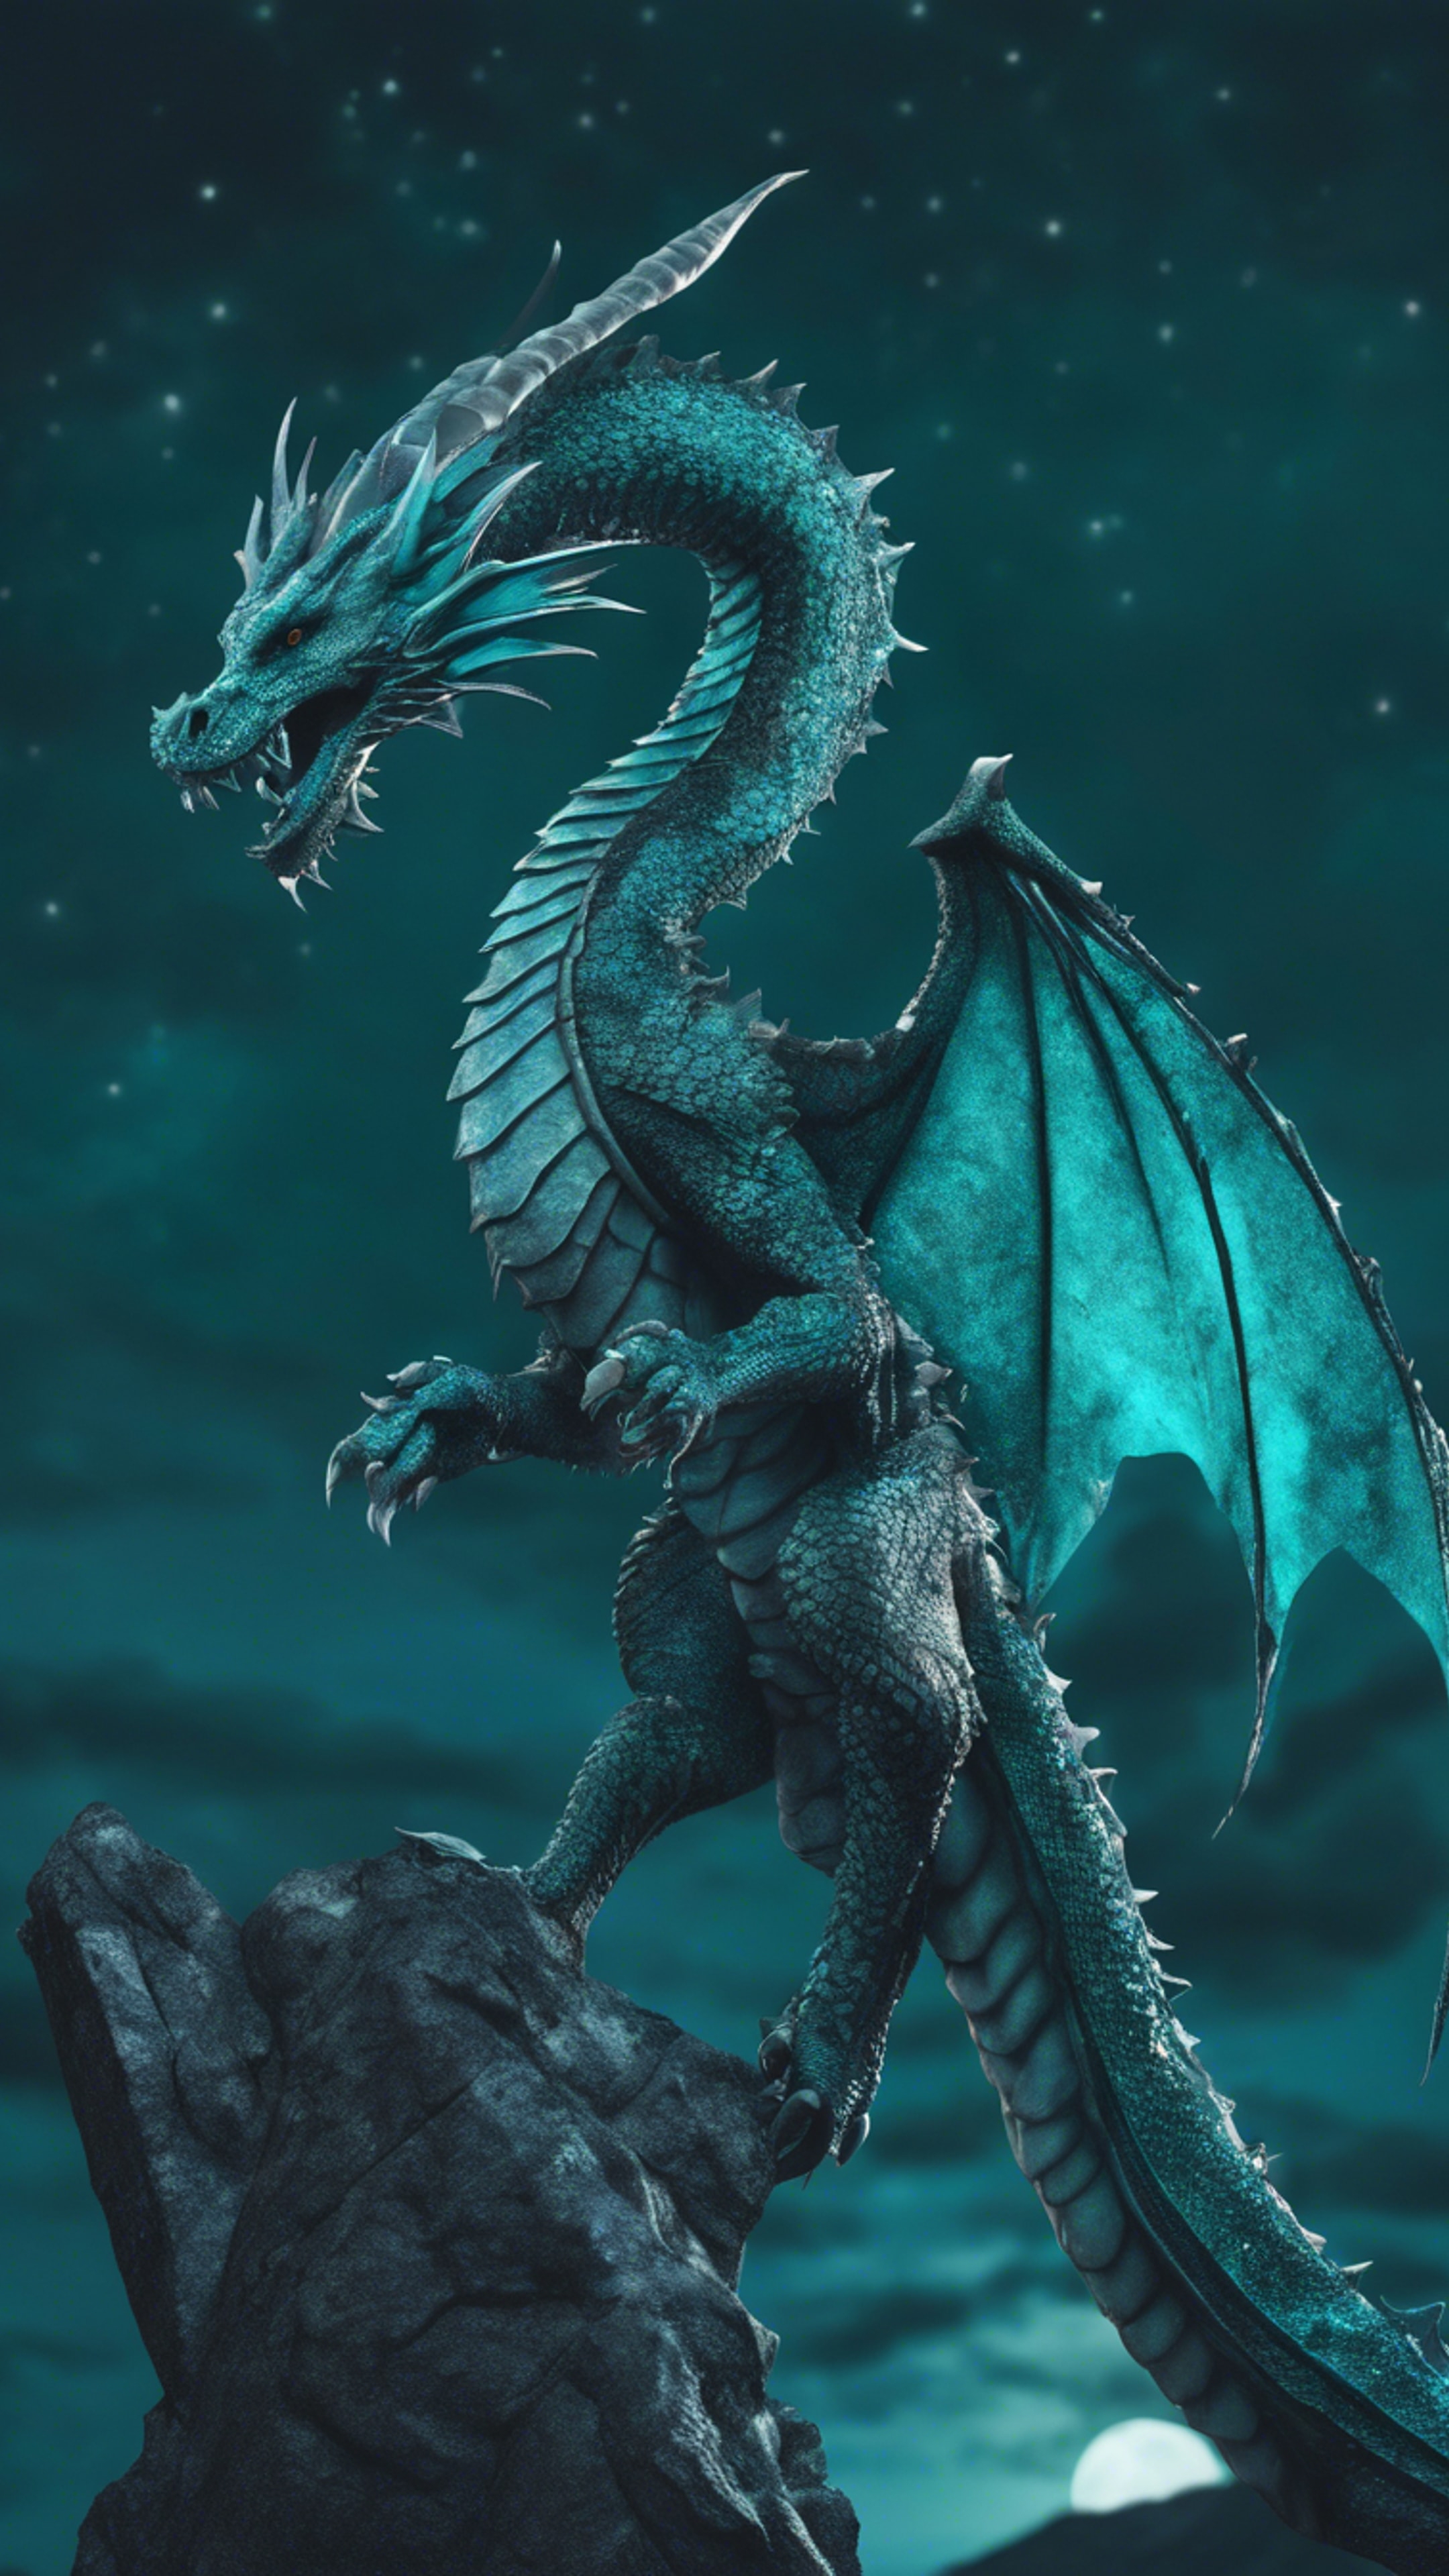 A serpentine Gothic dragon perched on a tall mountain, its teal scales shimmering under the moonlight. Divar kağızı[91ef634c137e4b1f8ab5]